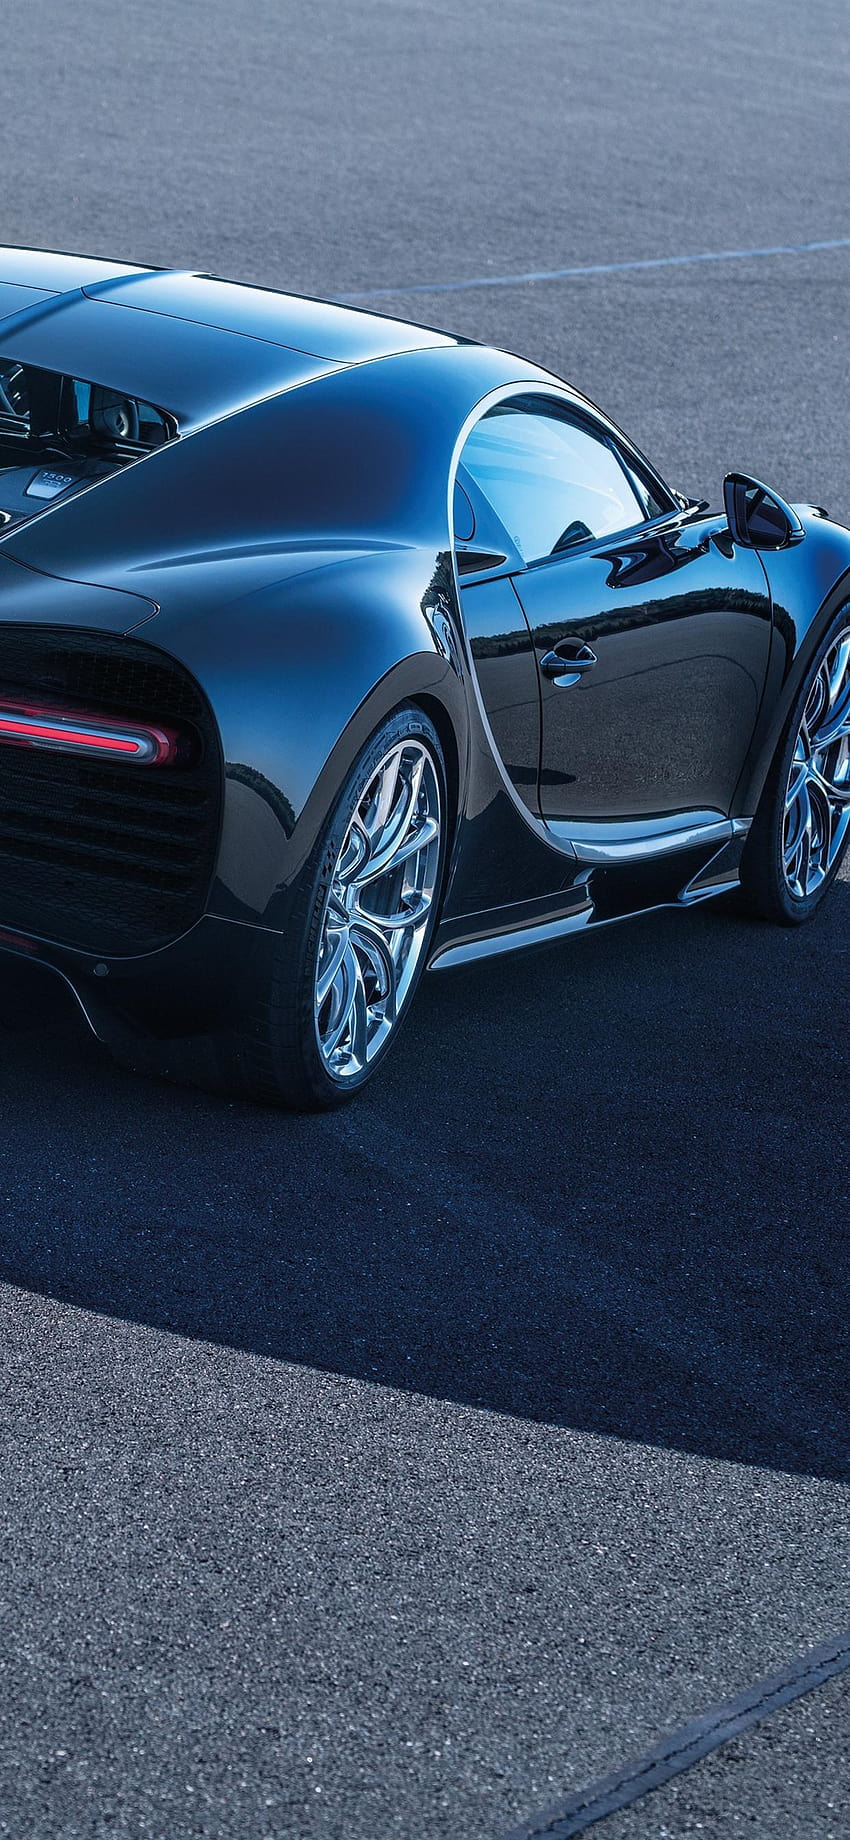 Bugatti Chiron iPhone Wallpapers Top 25 Best Bugatti Chiron iPhone  Wallpapers  Getty Wallpapers